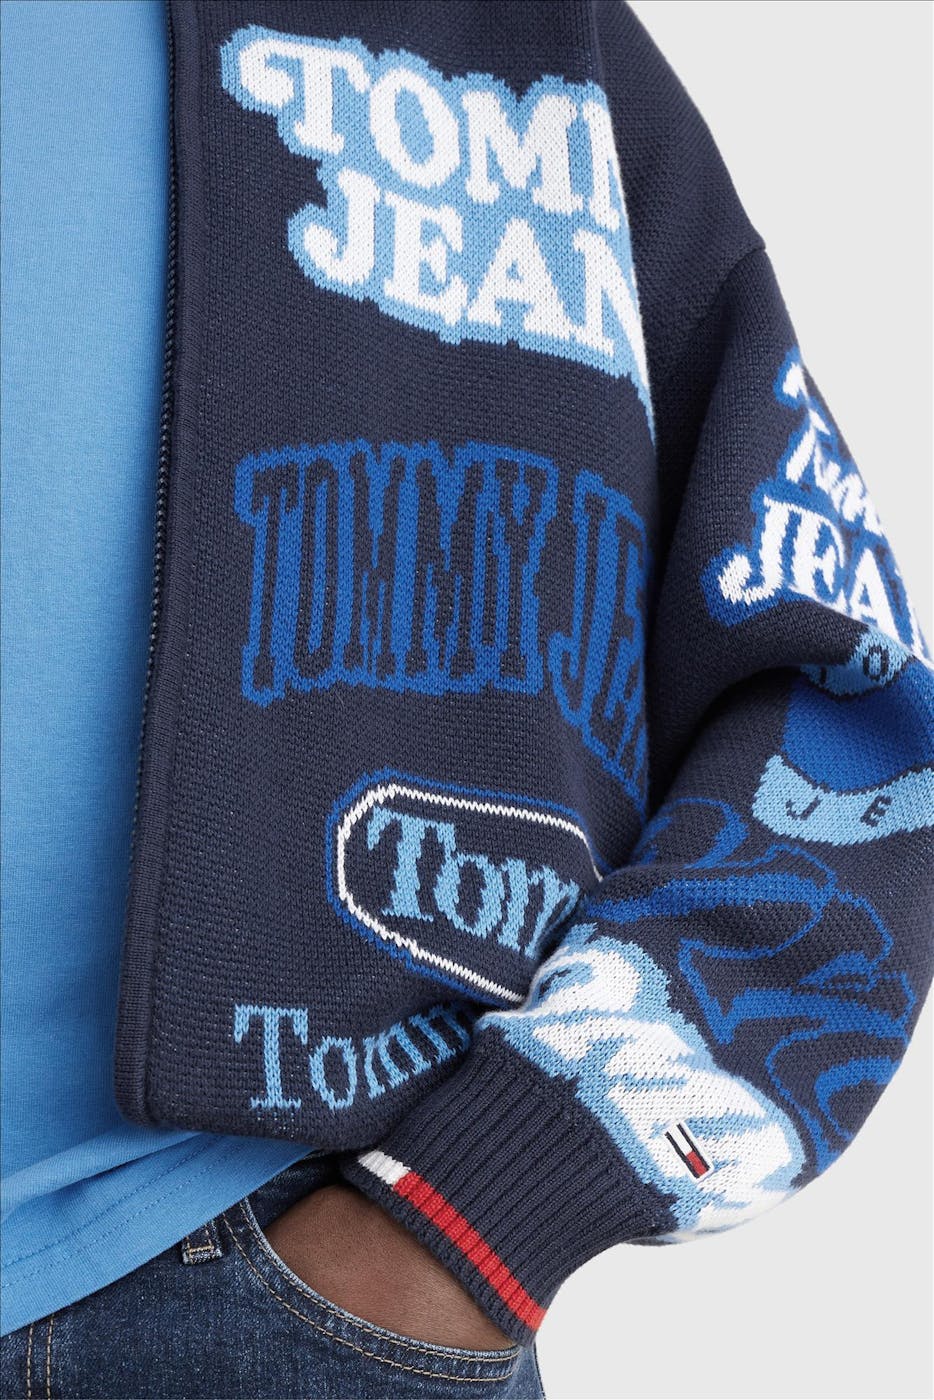 Tommy Jeans - Donkerblauwe Knitted Bomber trui